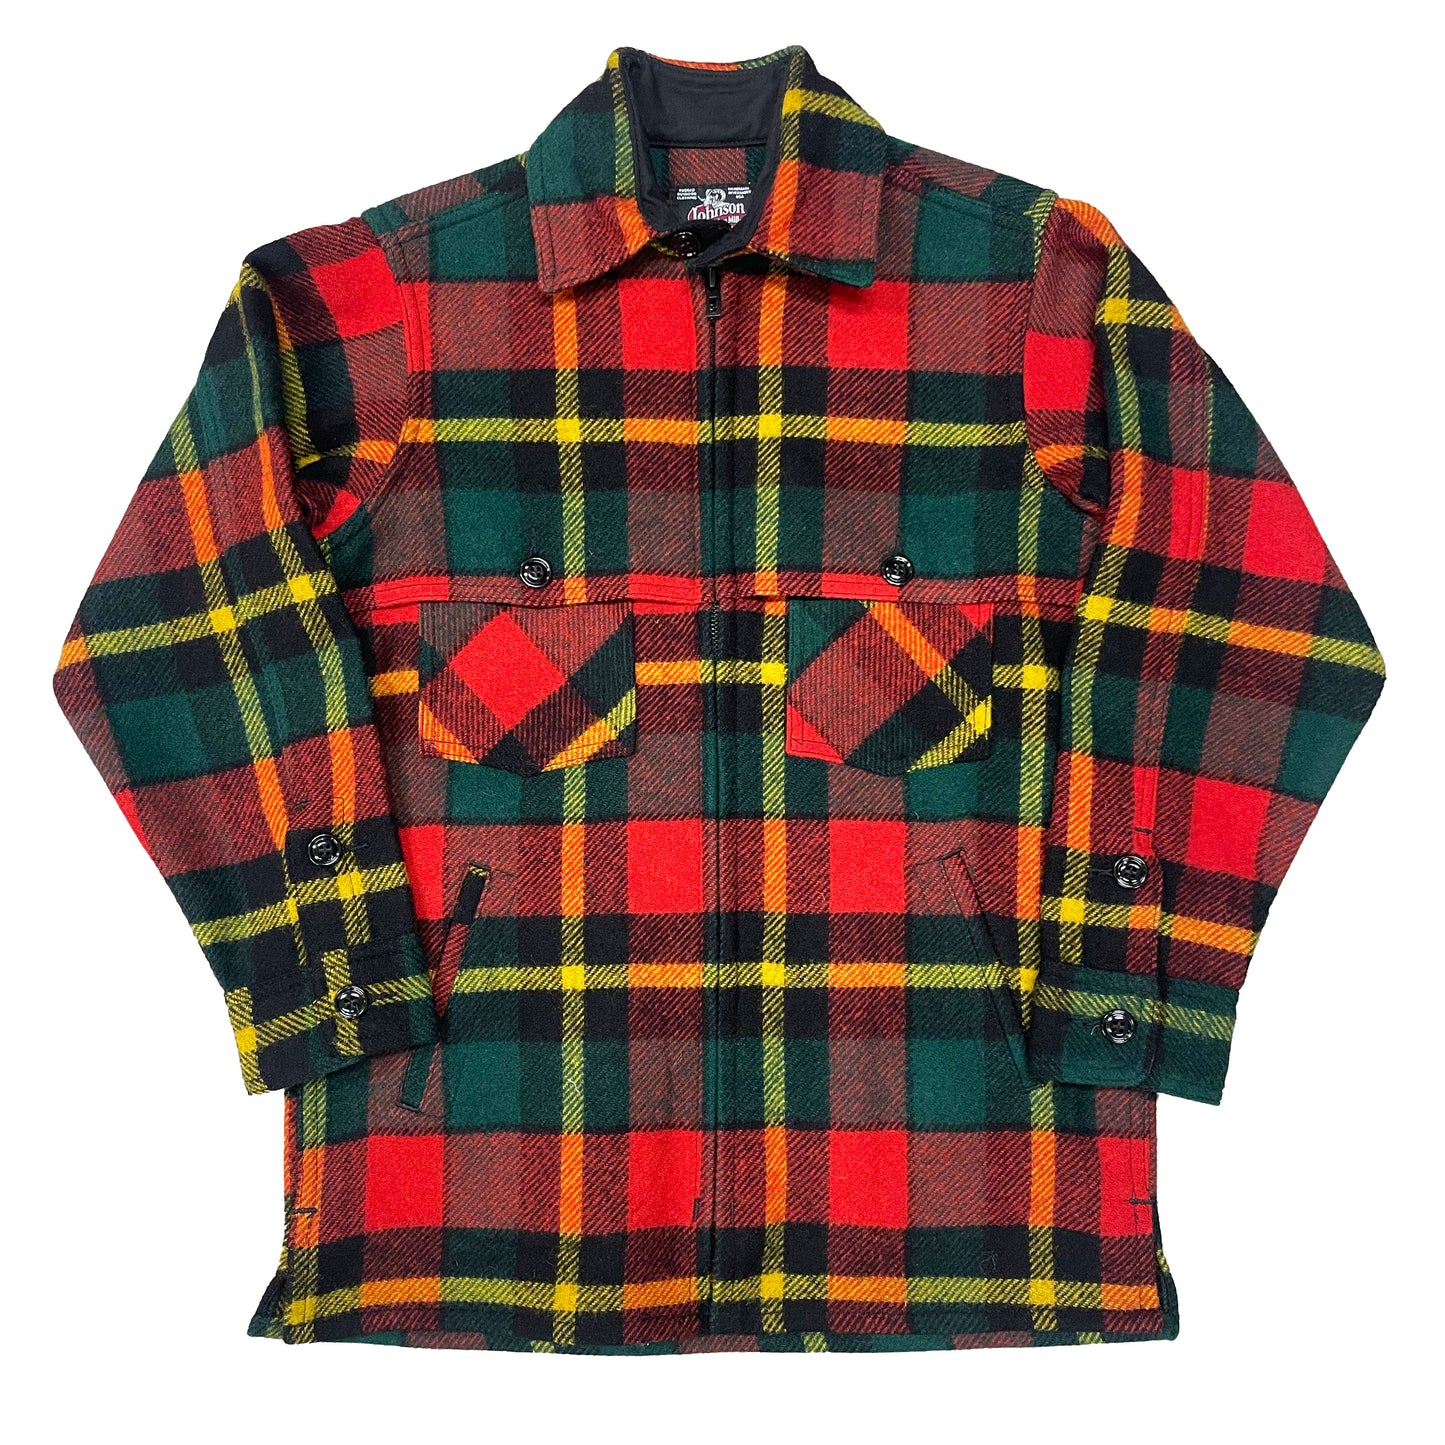 Womens Jac Shirt in red yellow green plaid, double cape over shoulders, zipper front, button collar & cuffs.